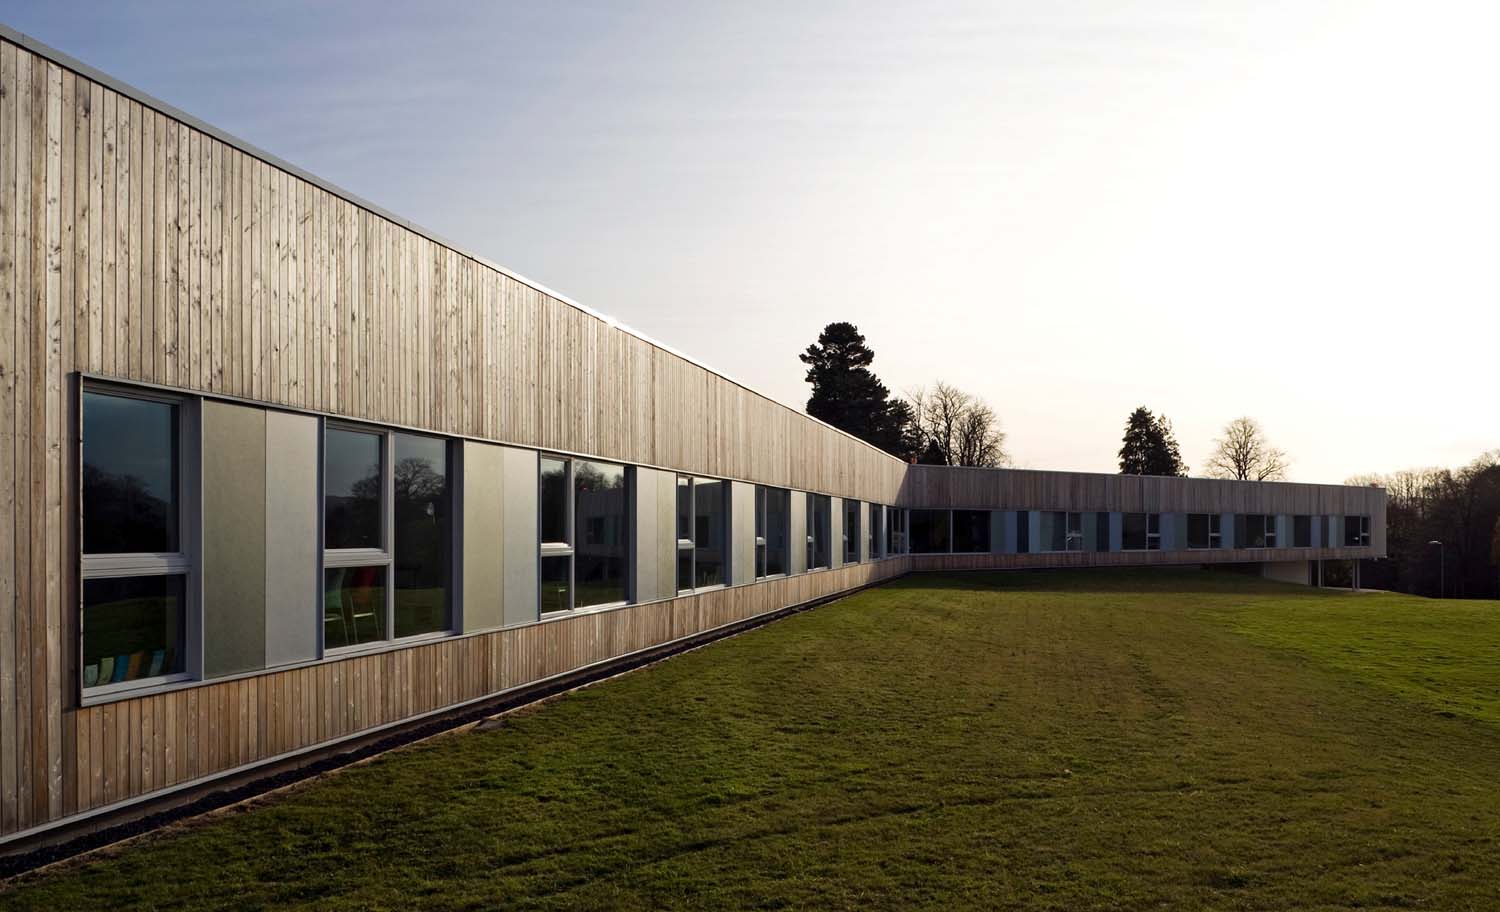 The exterior of a single storey building clad in timber with evenly spaced windows, the sun is setting in the background